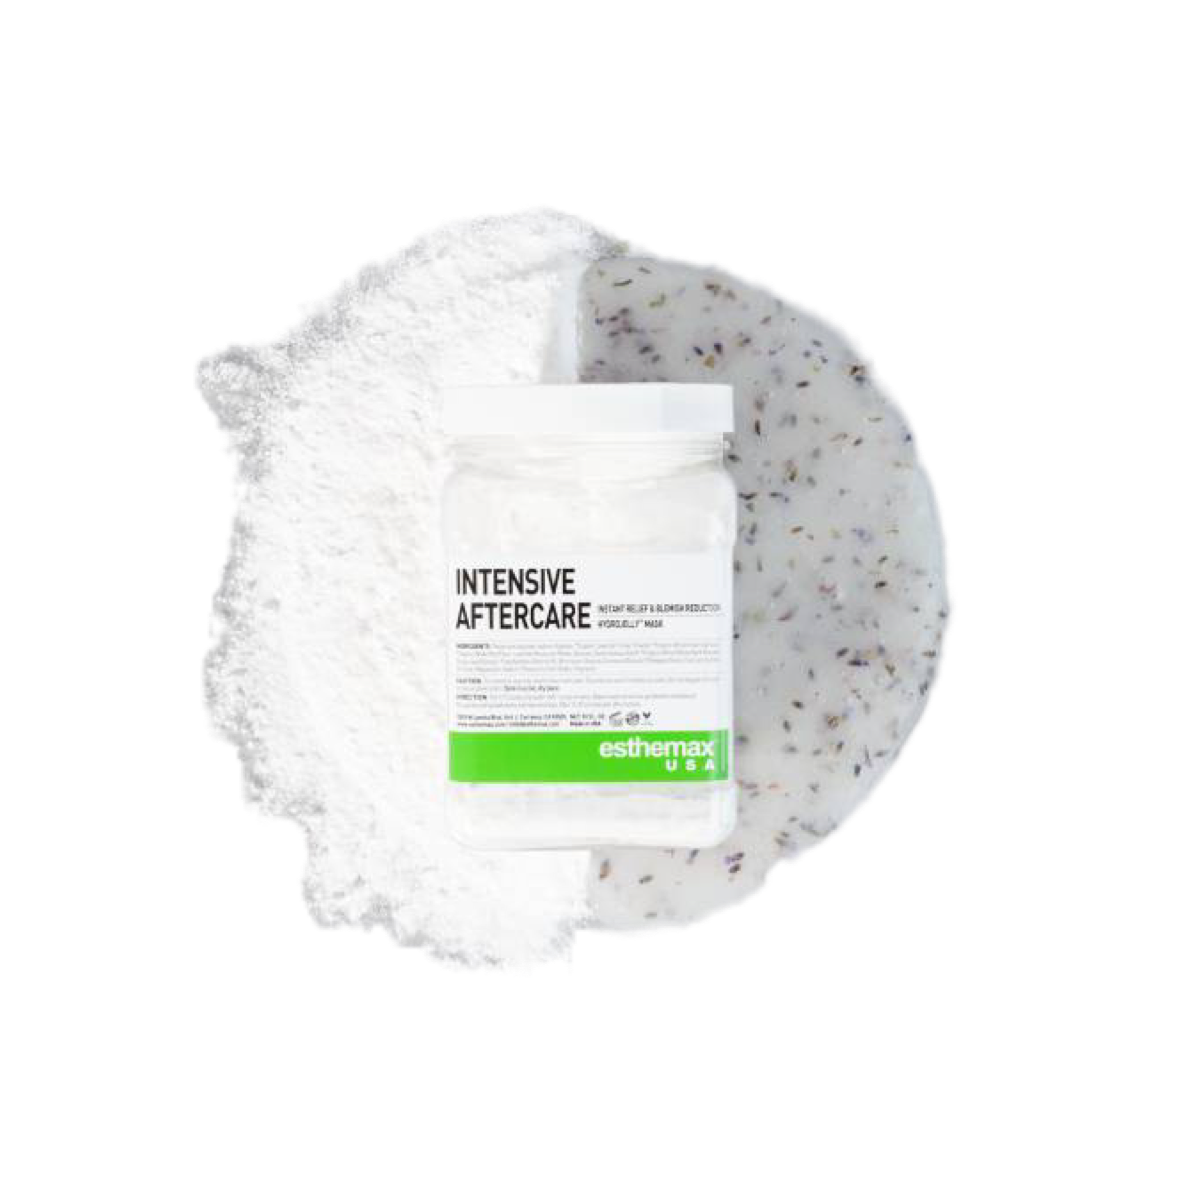 Intensive Aftercare hydro jelly mask skincare facial